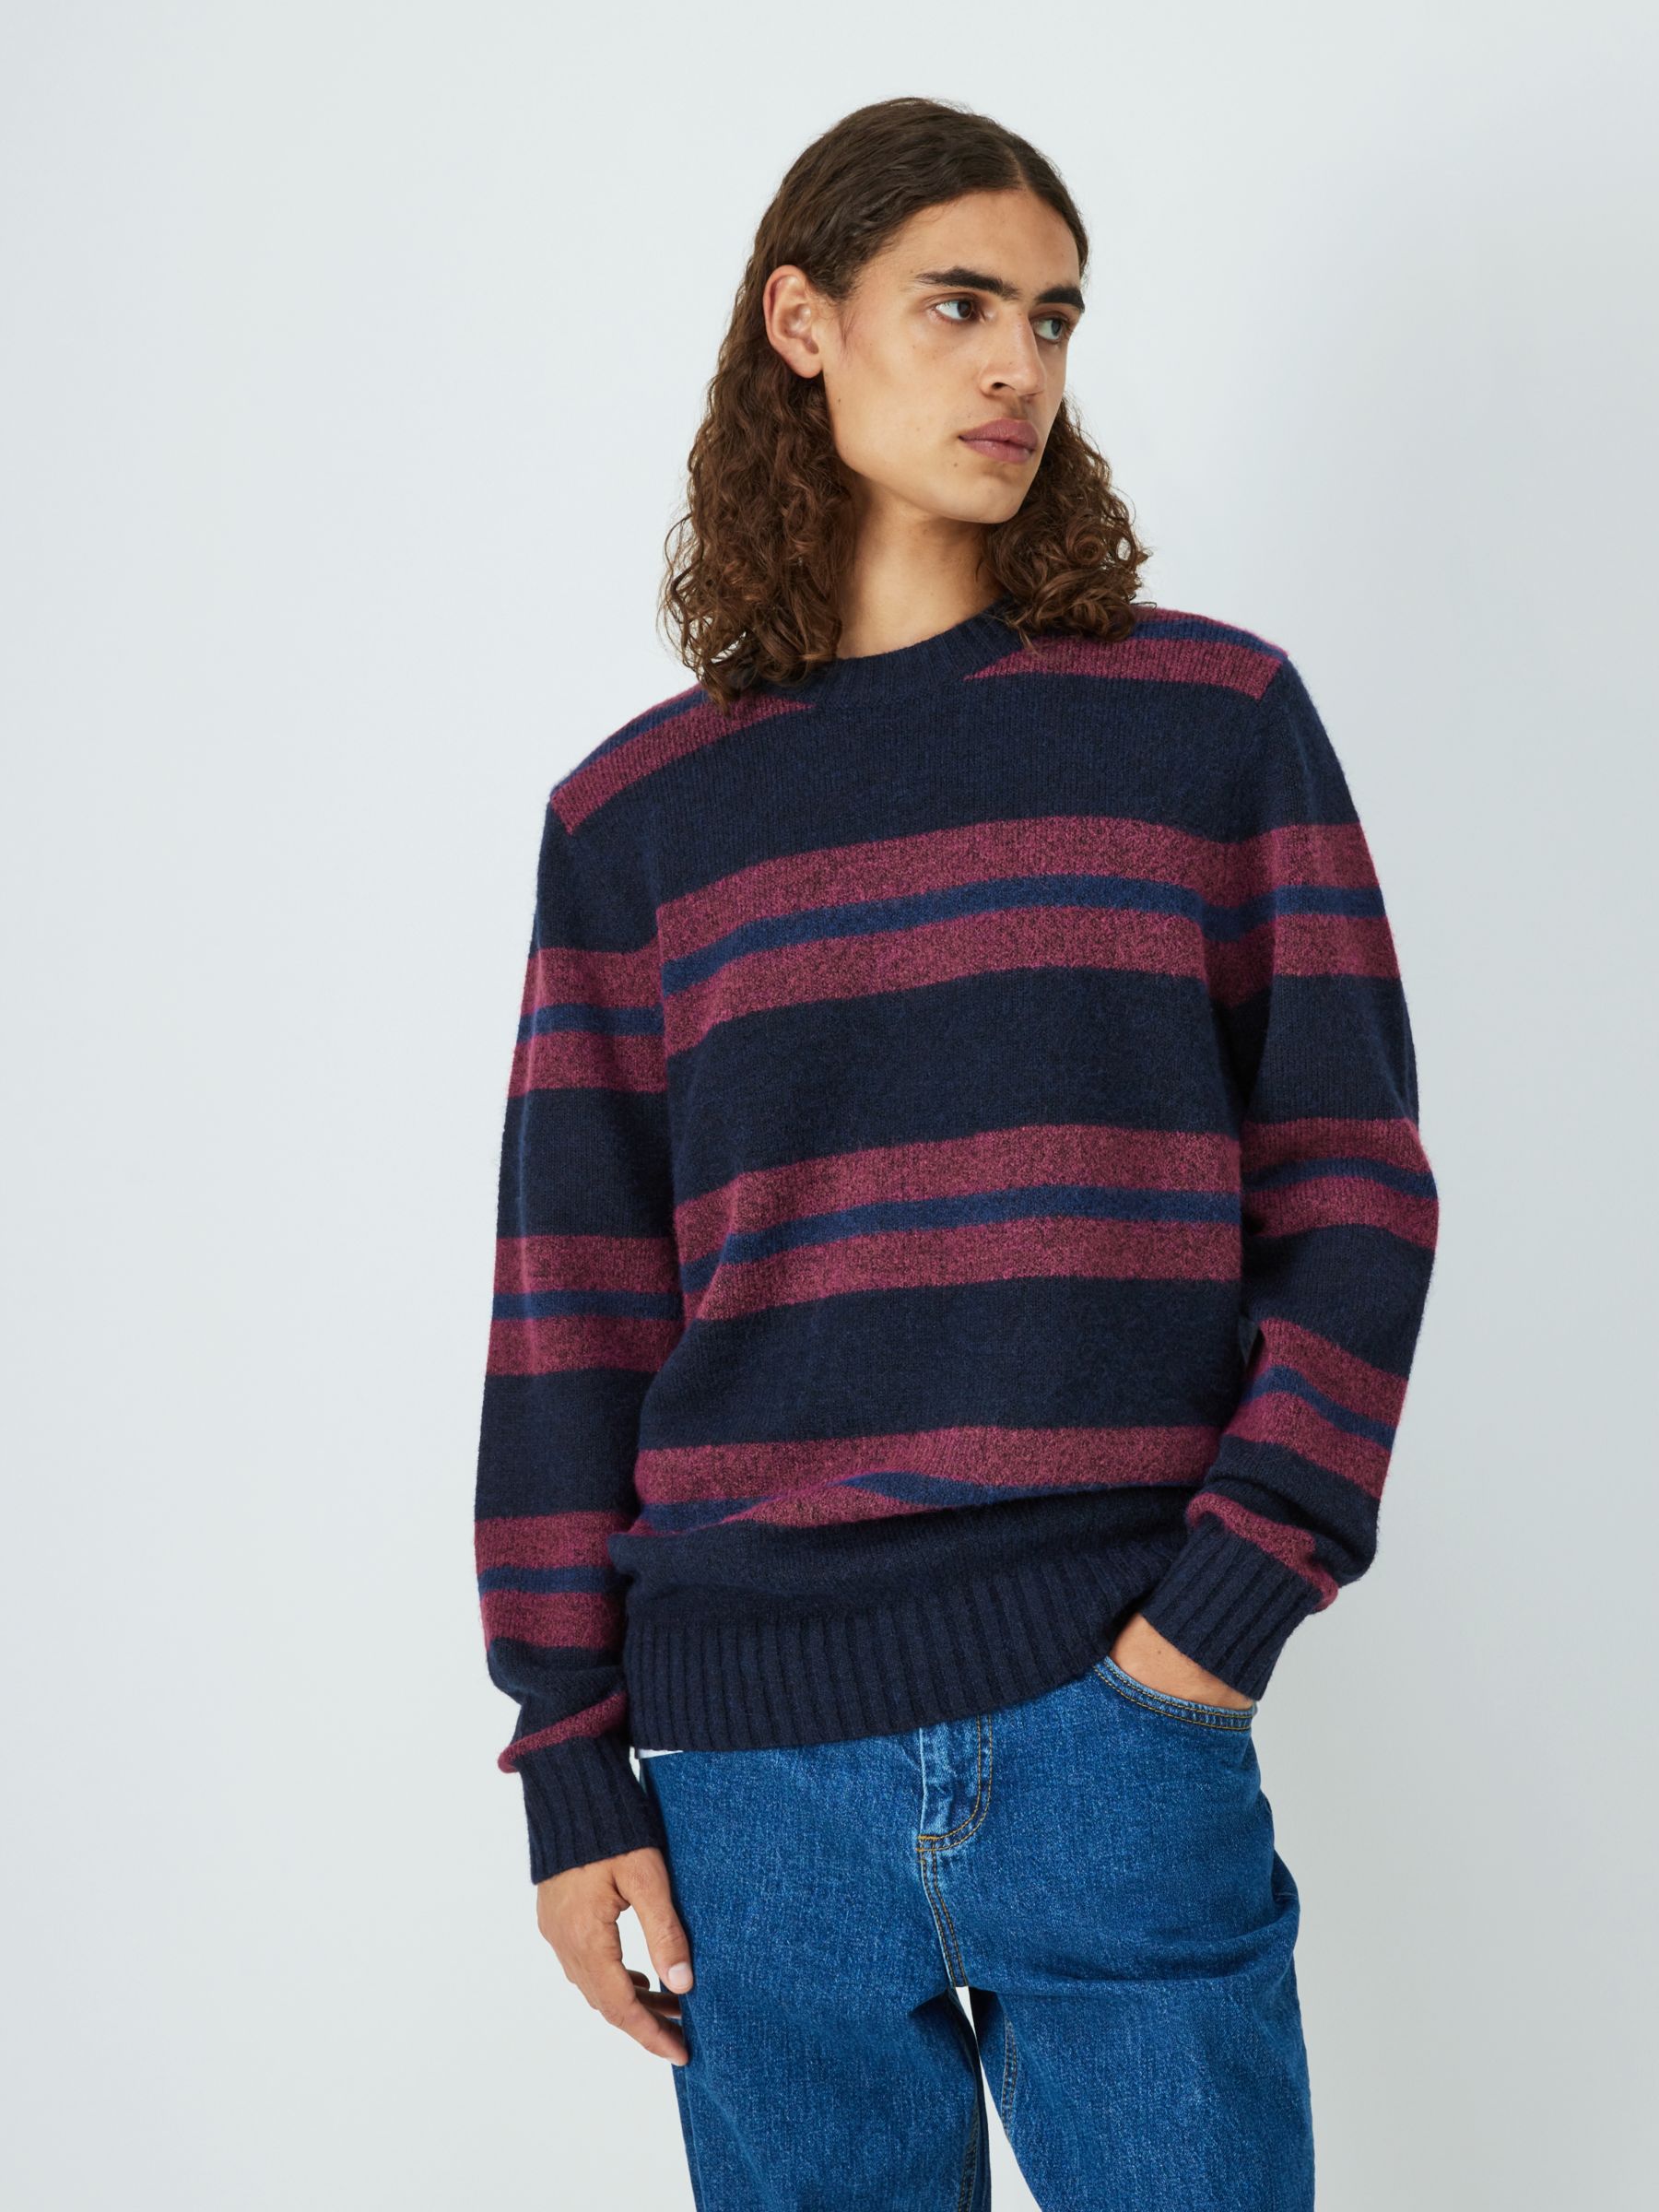 John Lewis ANYDAY Recycled Wool Blend Jumper, Red/Multi